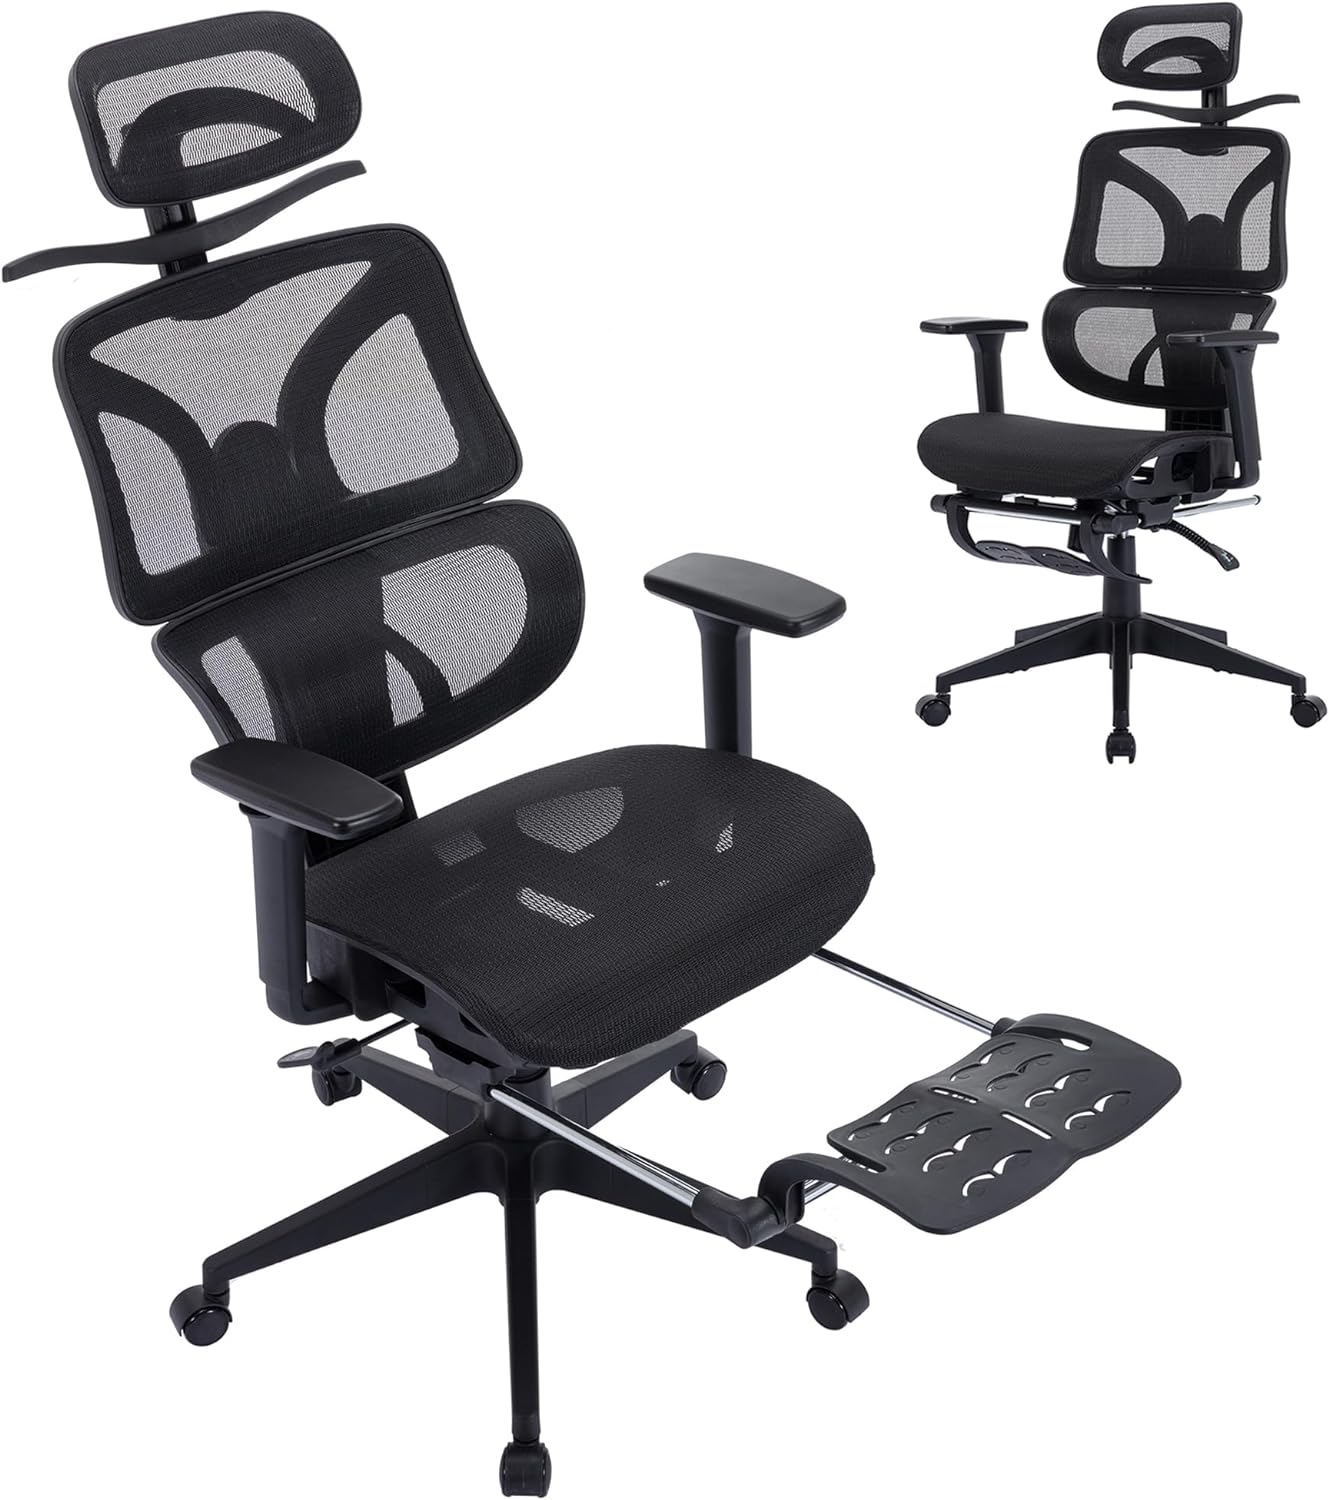 VECELO Swivel Ergonomic High Back Mesh Office Chair with Retractable Footrest